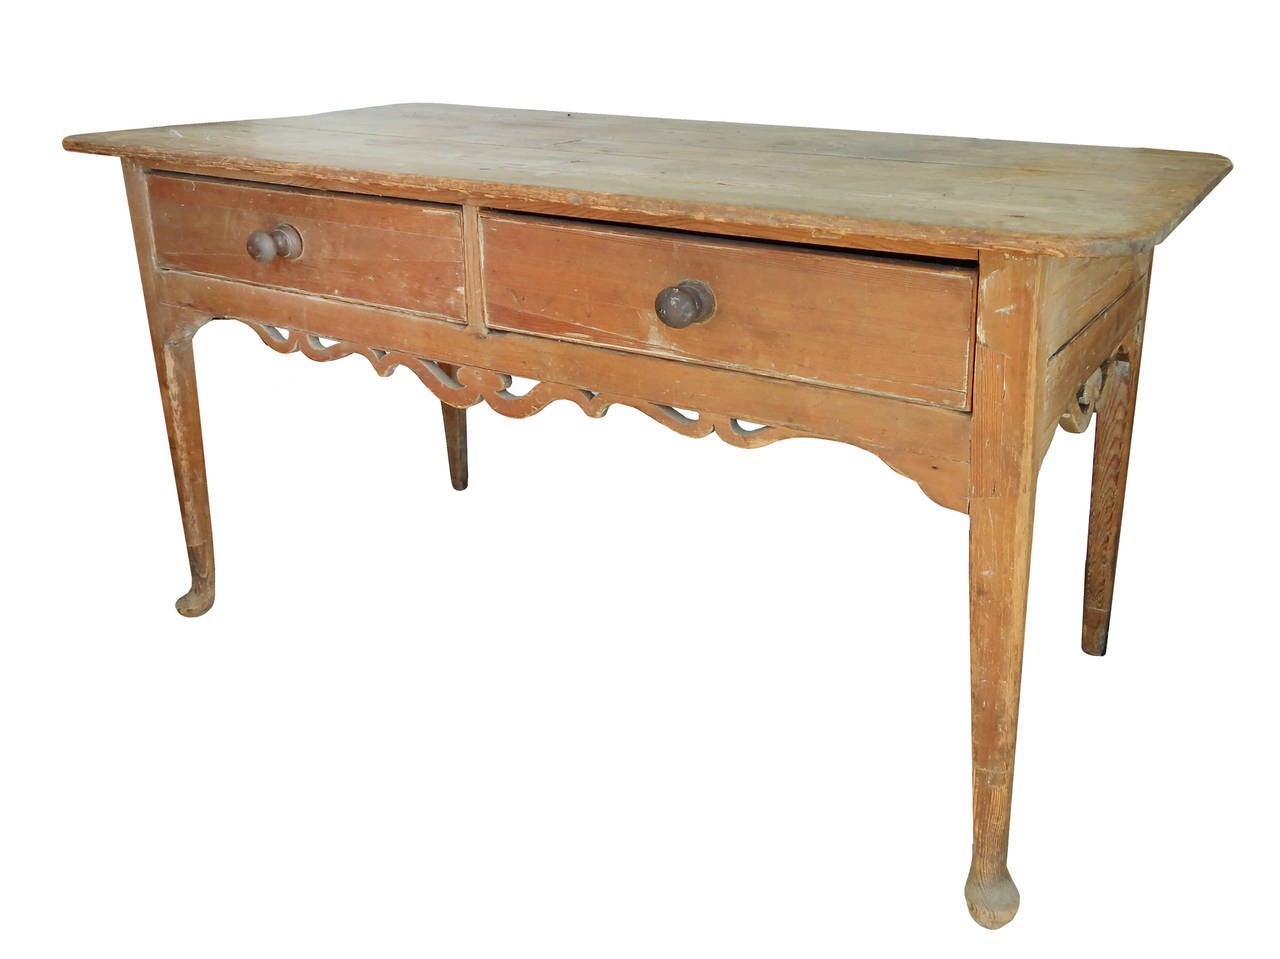 Antique European table with scroll apron and two drawers in original pine finish.